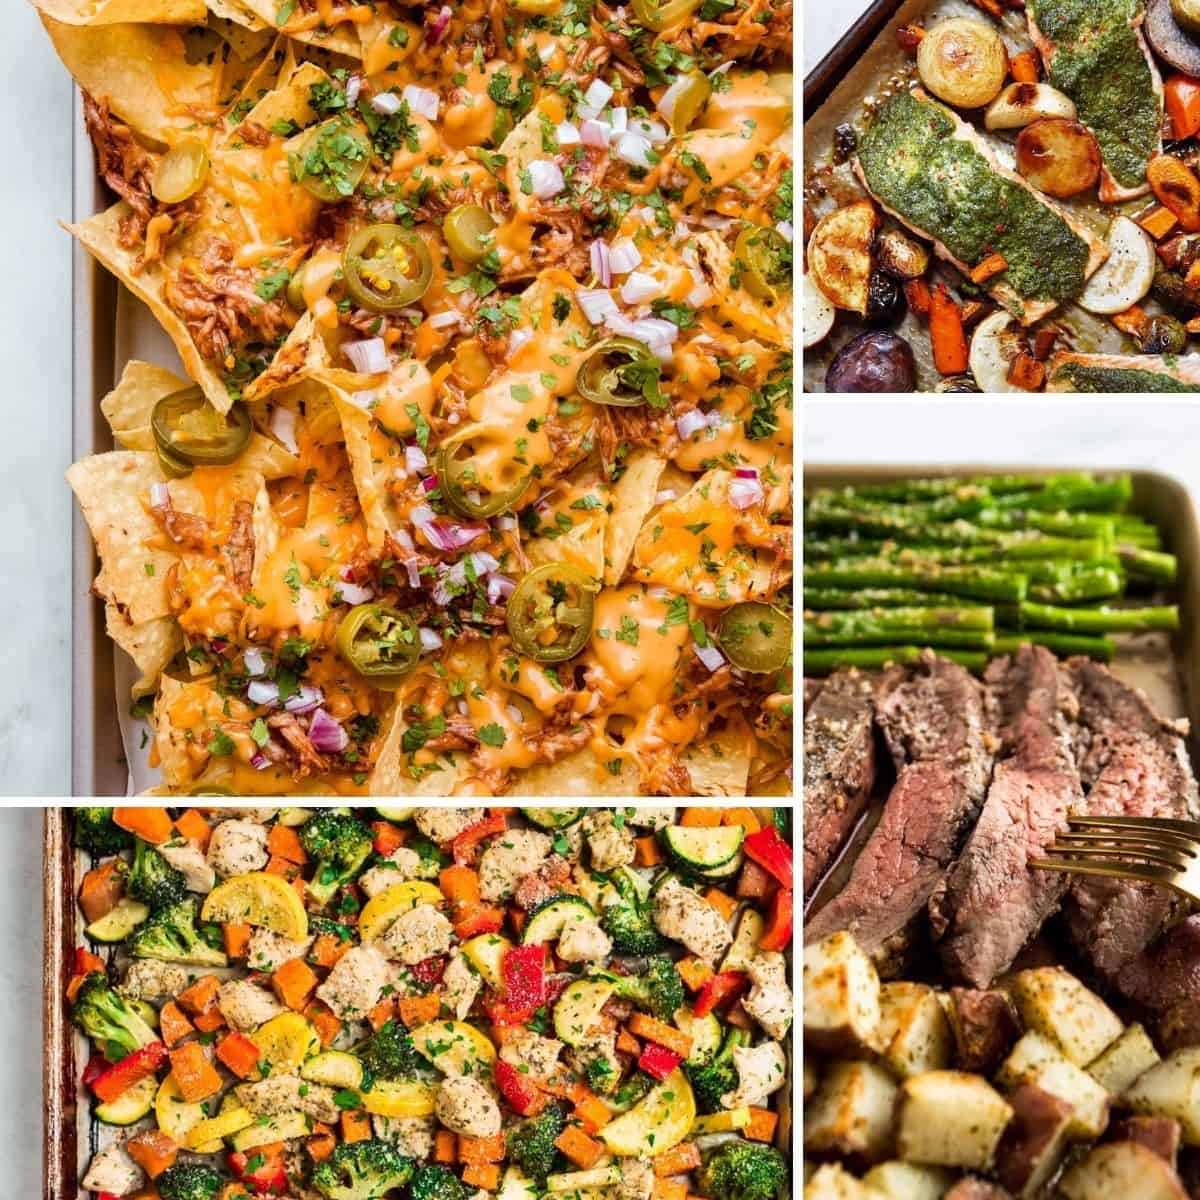 https://www.cupcakesandcutlery.com/wp-content/uploads/2021/08/sheet-pan-dinner-recipes-to-make-on-a-busy-weeknight.jpg